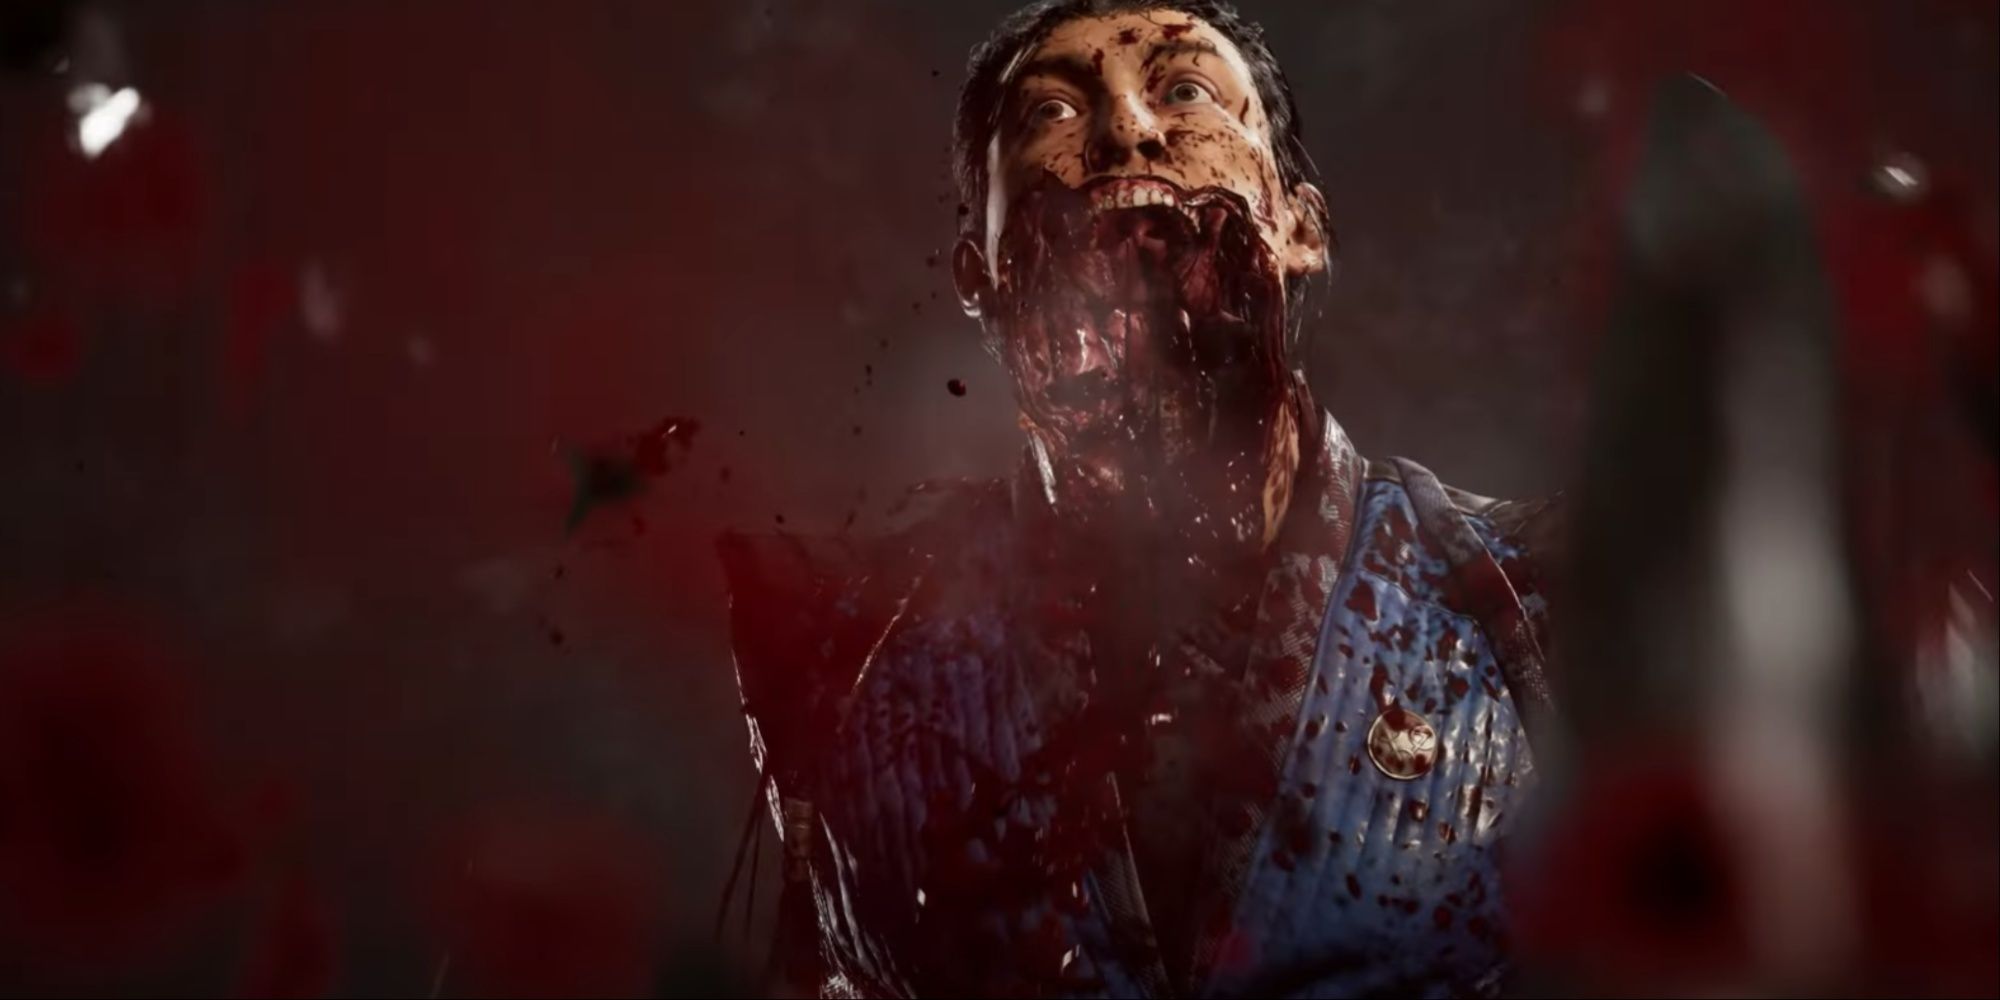 Sub-Zero with no arms and a completely torn off bottom half of his face due to a grenade explosion, blood all over the camera.